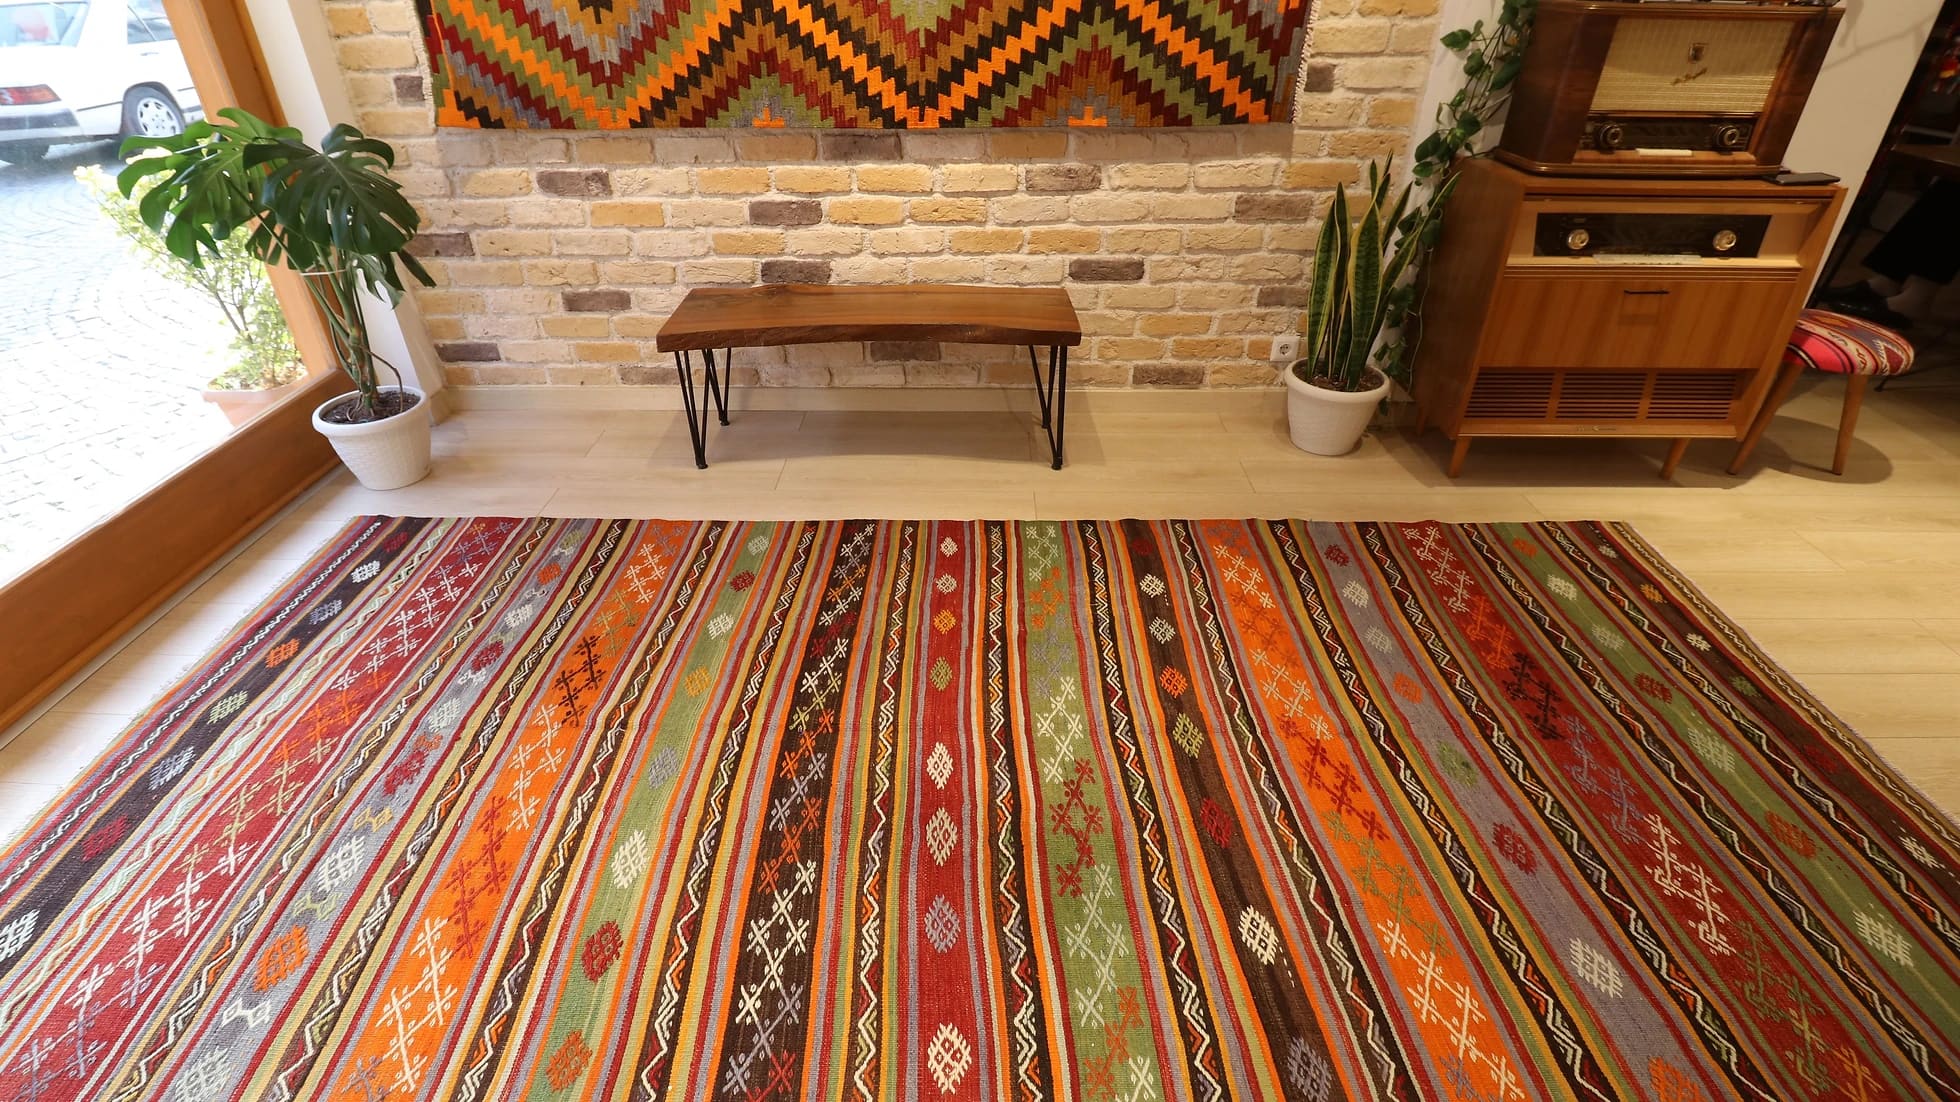 1960s large hallway runner rug in rustic earth tones such as brown, red, orange, gray, and green by Kilim Couture New York